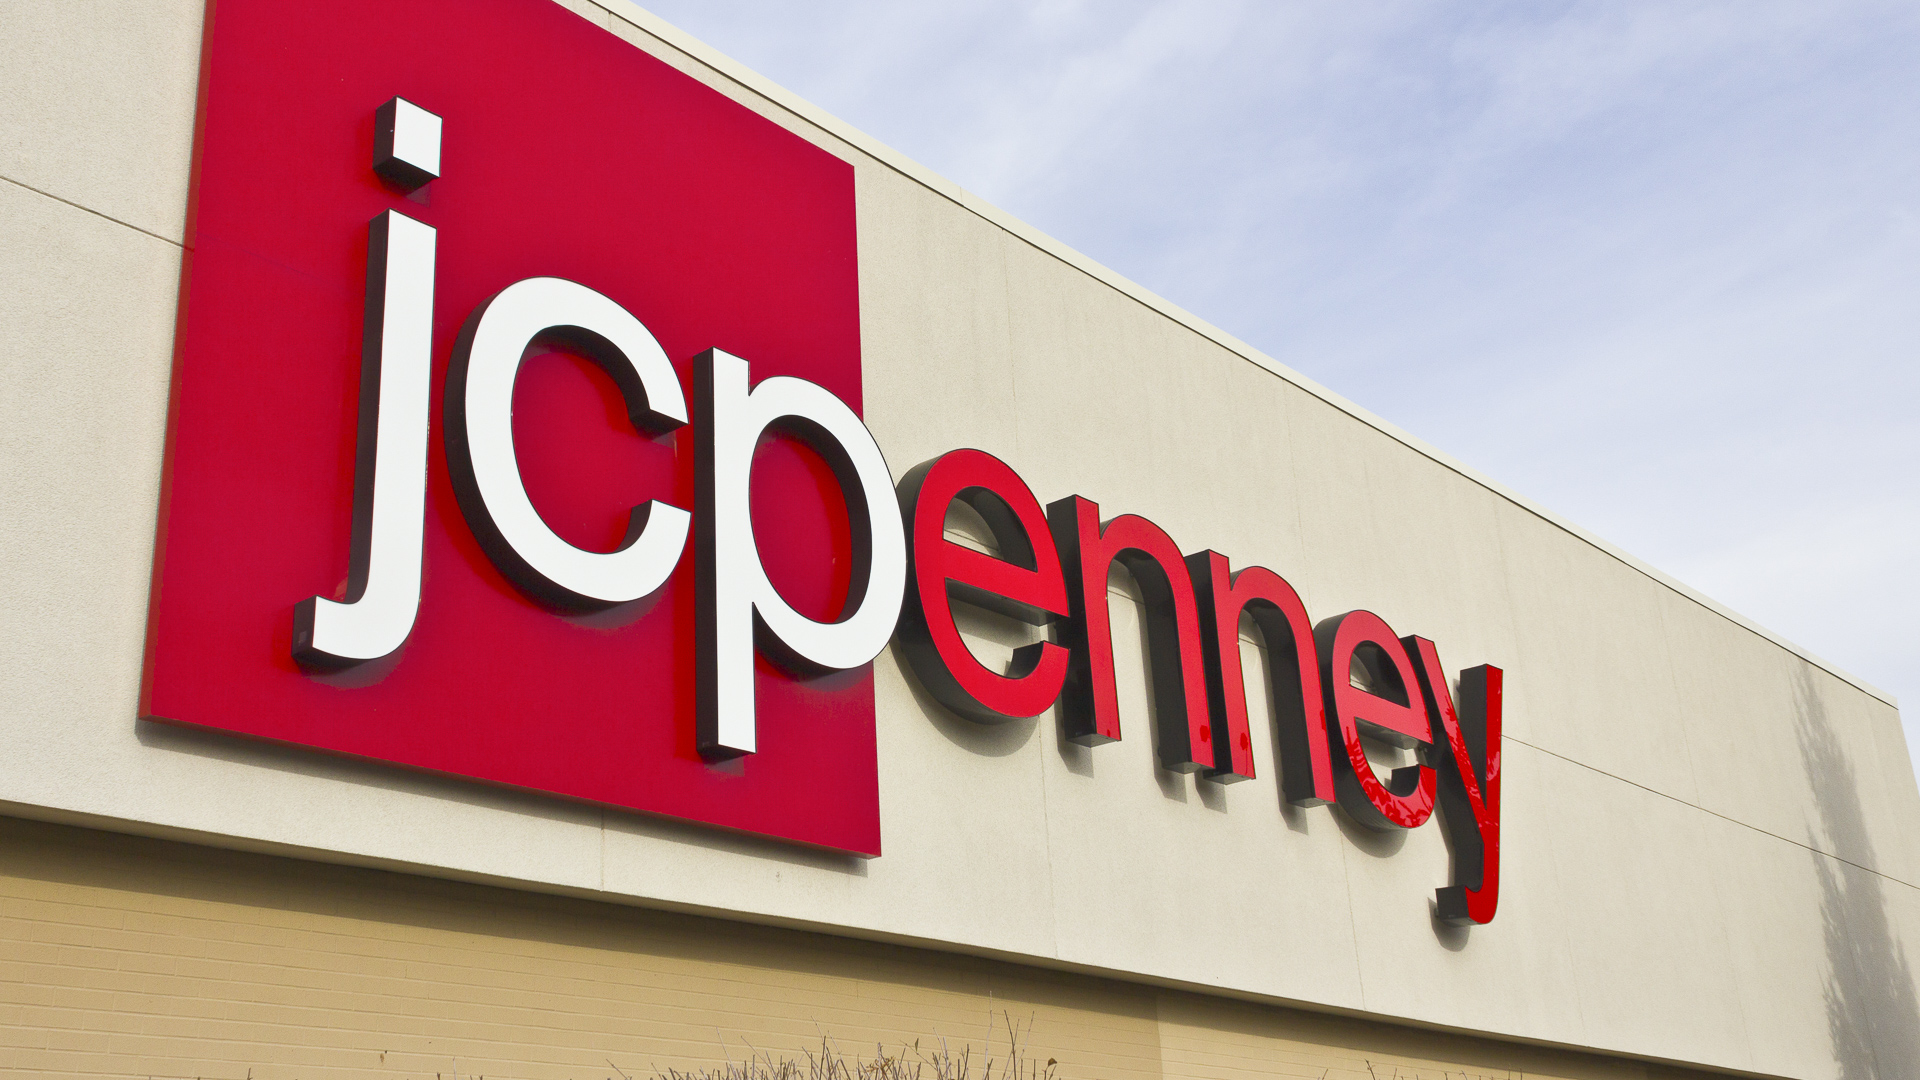 How to Use The JCPenney App